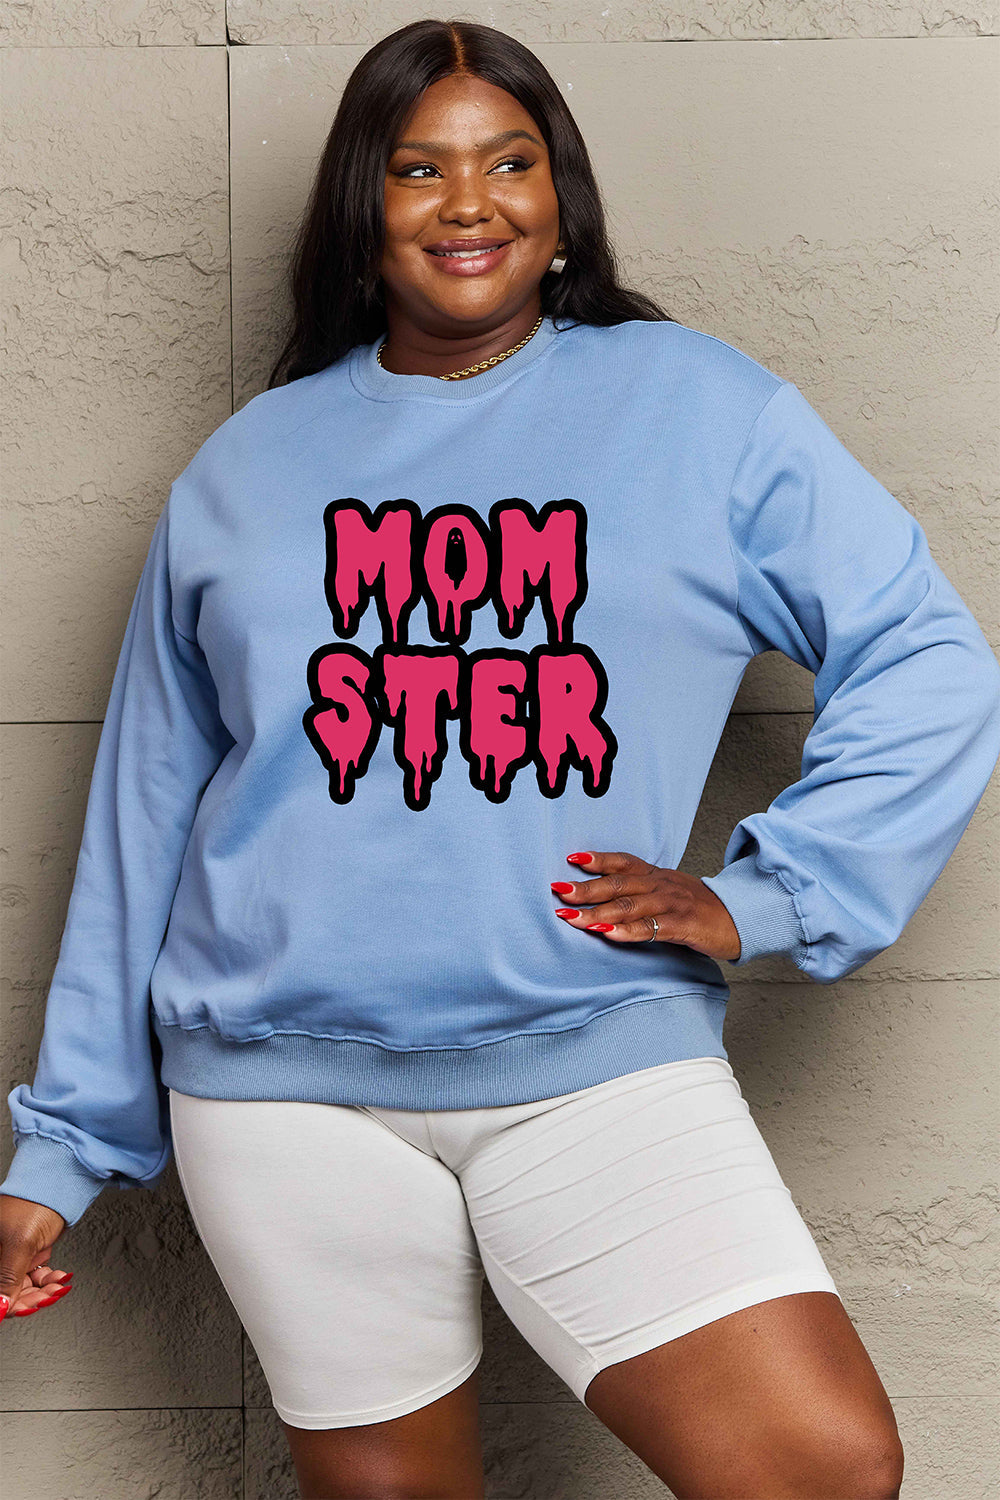 Simply Love Full Size MOM STER Graphic Sweatshirt BLUE ZONE PLANET